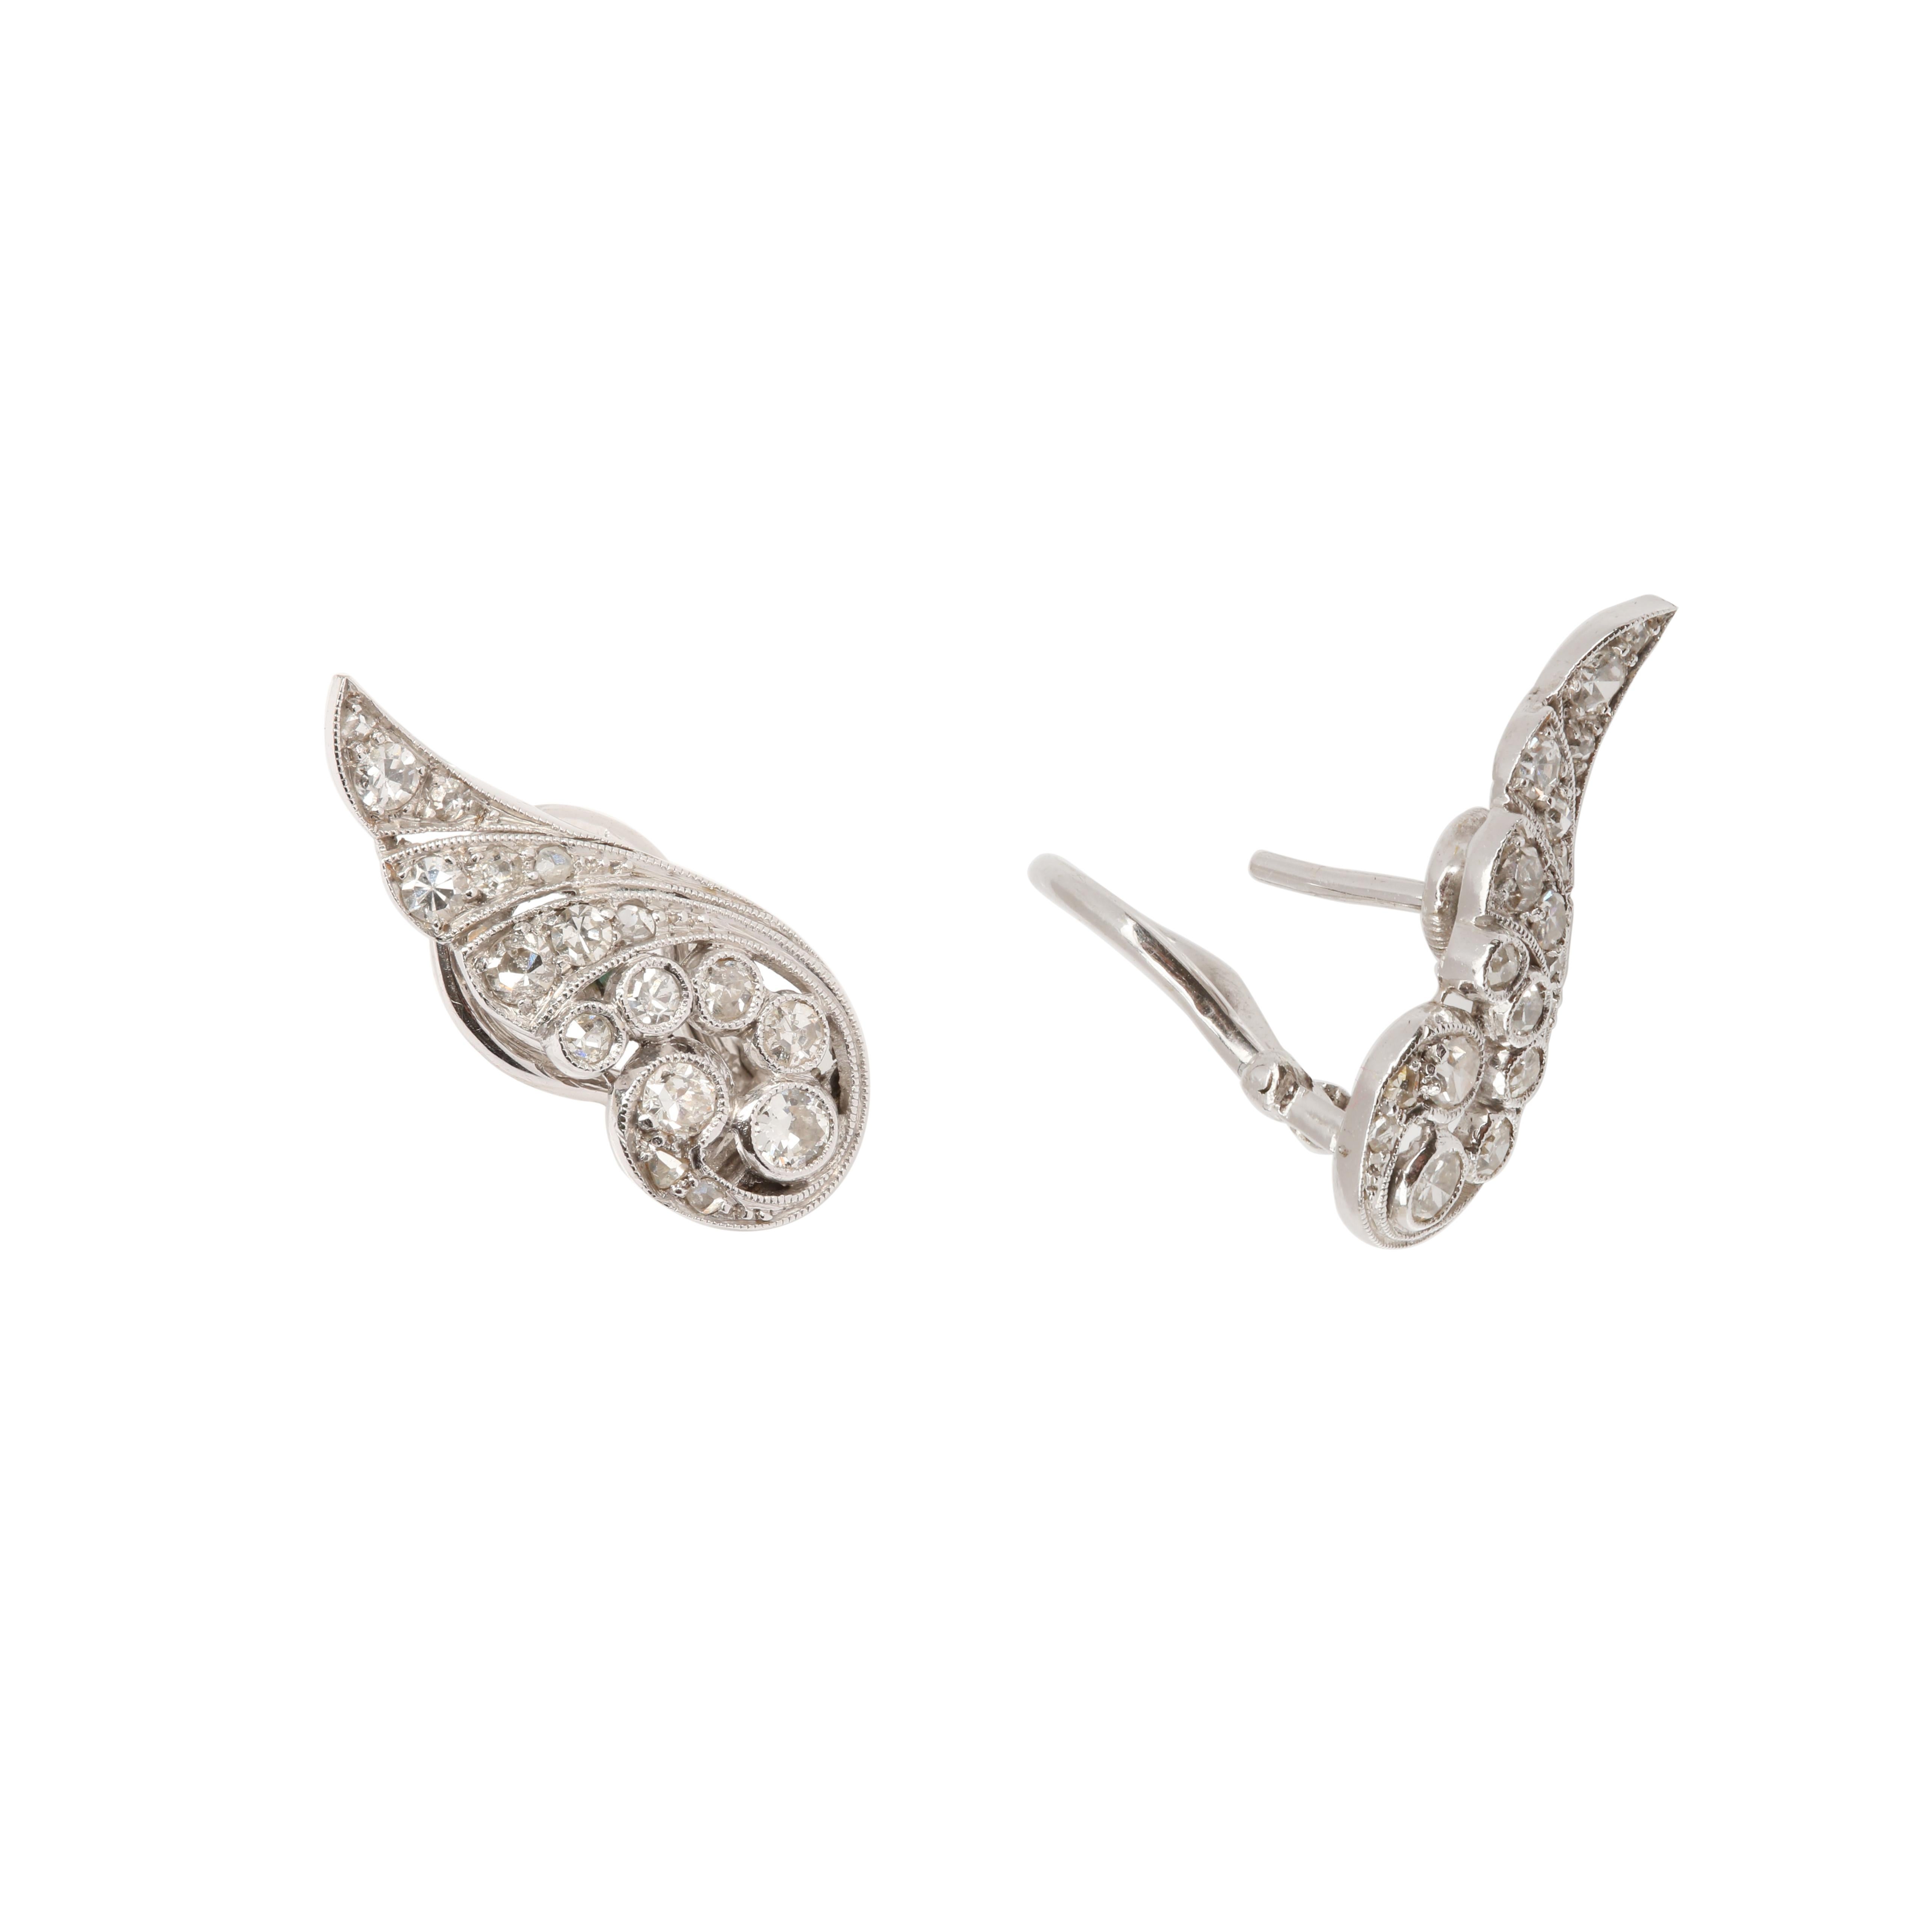 White gold wings earrings set with brilliant and old cut diamonds.

Total estimated weight of diamonds: 0.60 carats

Dimensions : 20.34 x 8.51 x 2.54 mm (0.801 x 0.335 x 0.100 inch)

Weight of the earrings: 4.5 g

18 karat white gold, 750/1000th